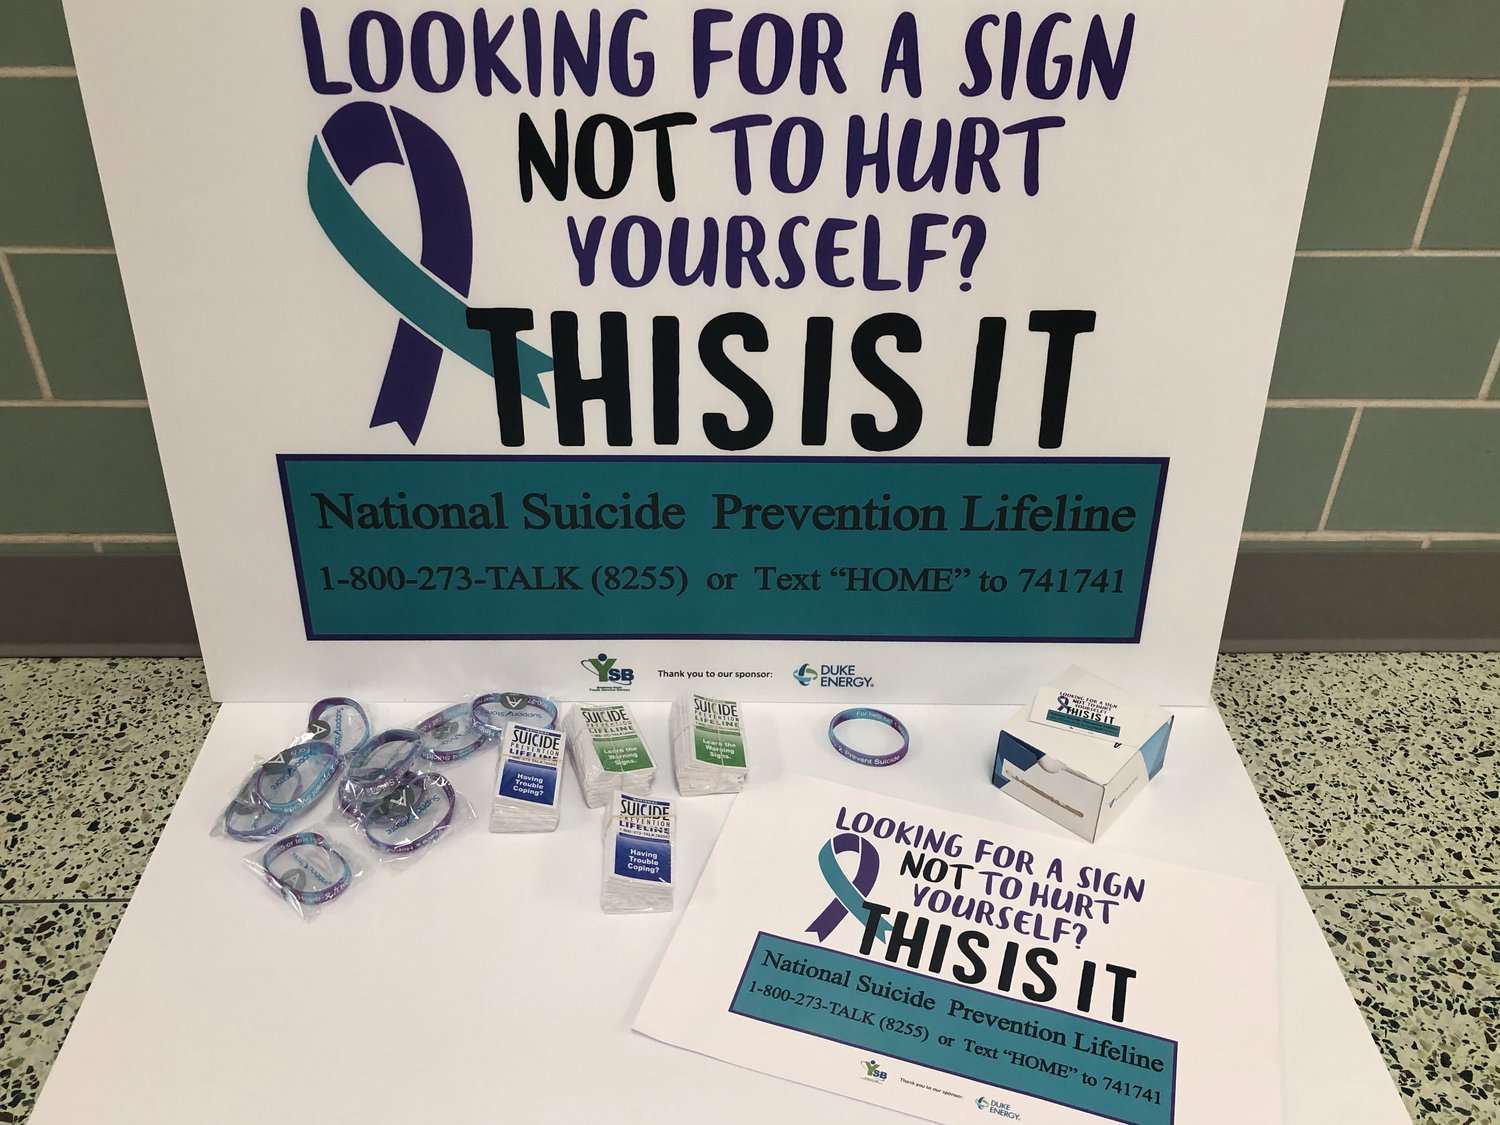 Montgomery County Youth Service Bureau's Suicide Prevention Awareness Month campaign includes yard signs, bracelets and wallet cards listing hotline numbers and warning signs.